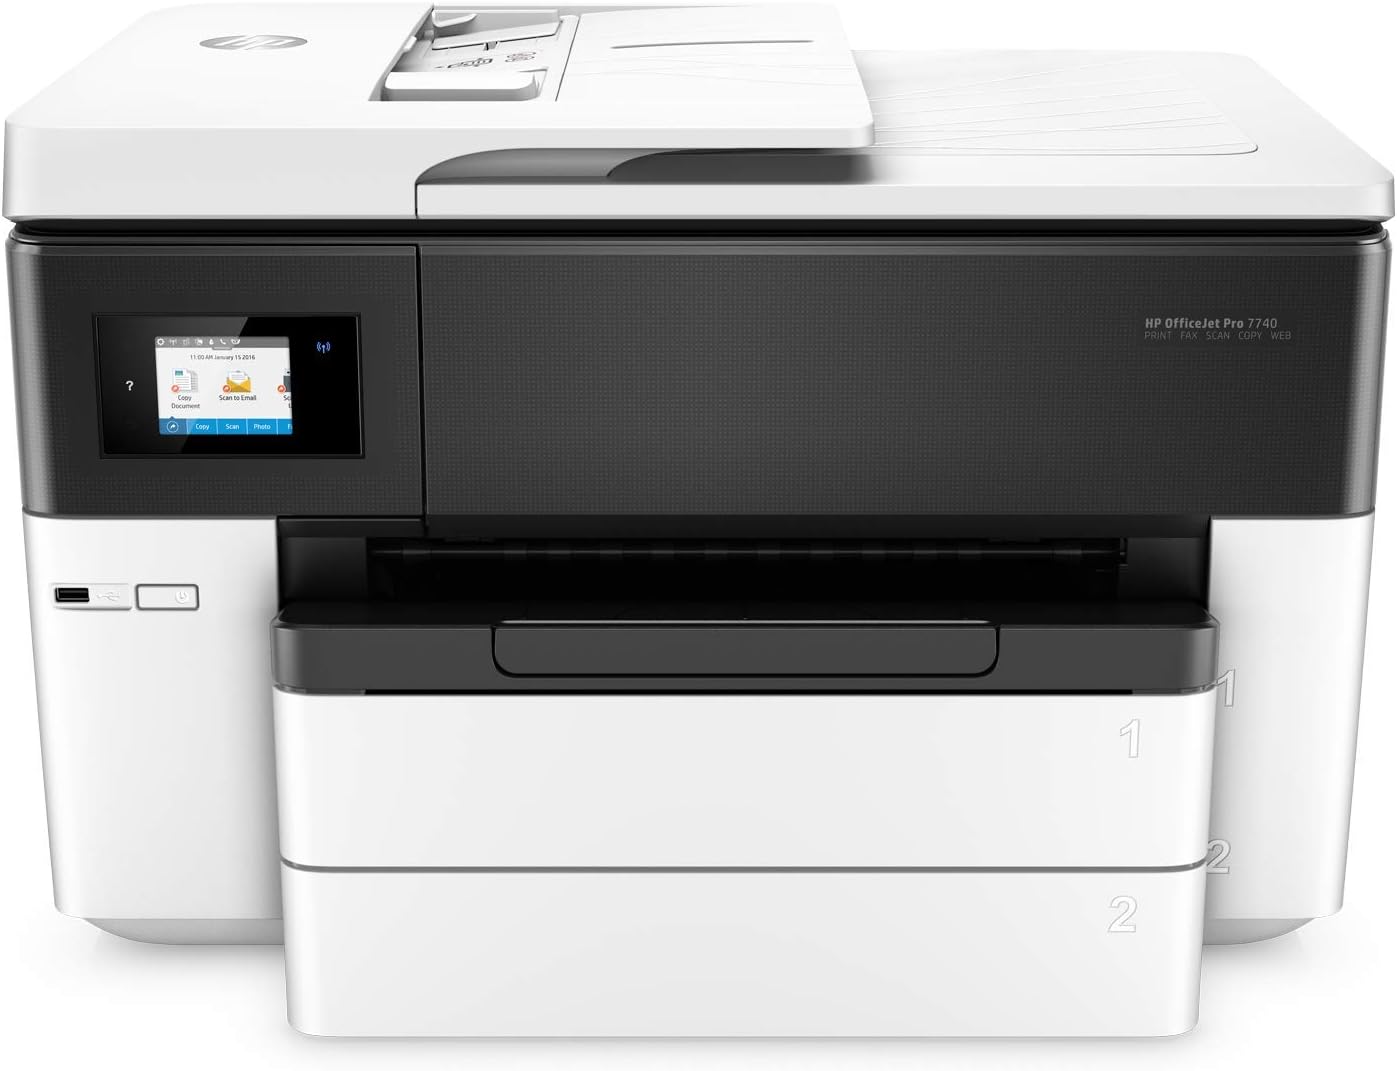 11x17 multifunction printer detailed review